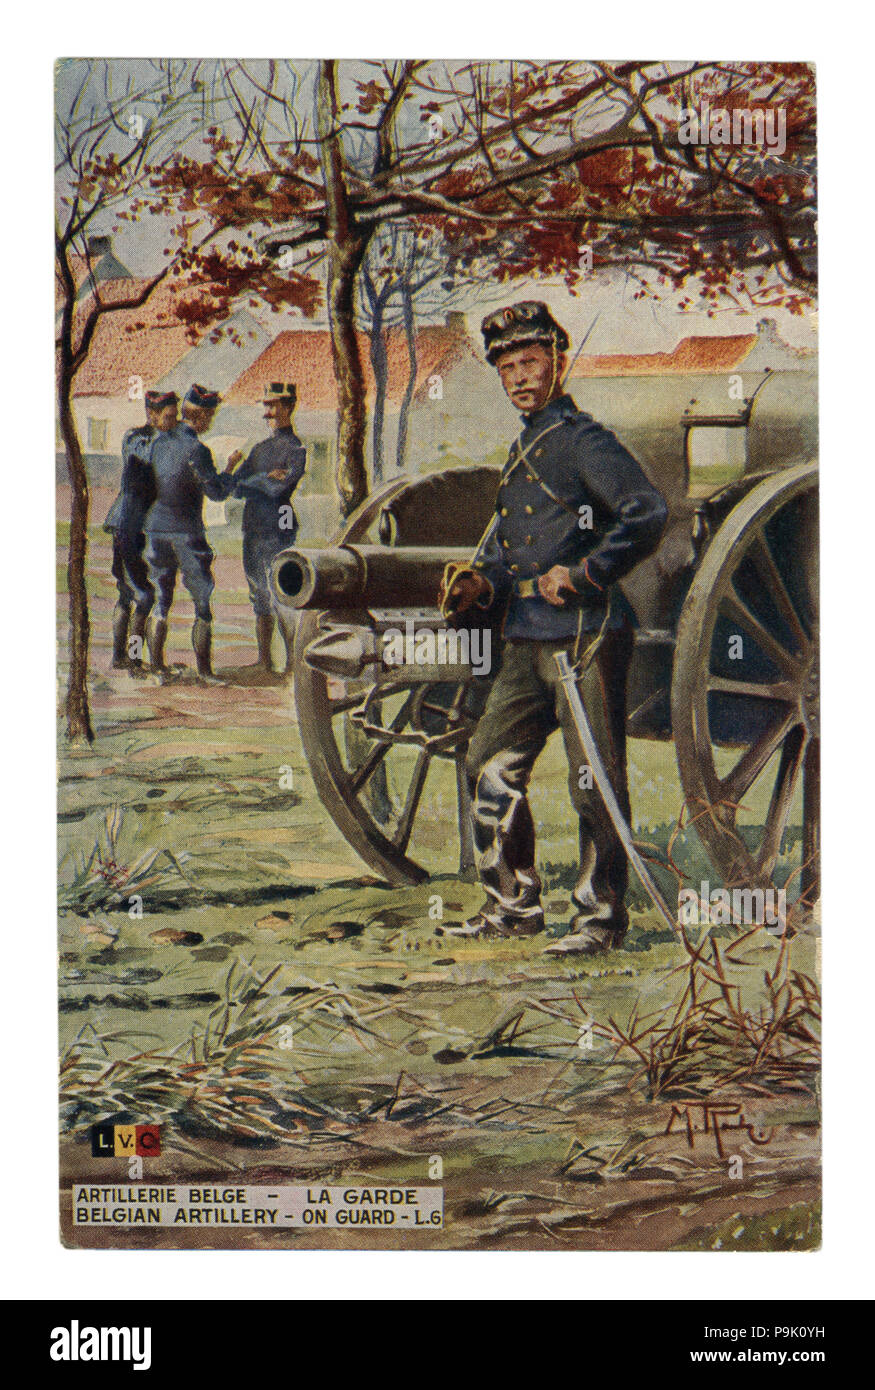 French historical postcard: Belgian artillery on guard. Artillery piece. A soldier with a sabre unsheathed in the post. world war one 1914-1918. Stock Photo